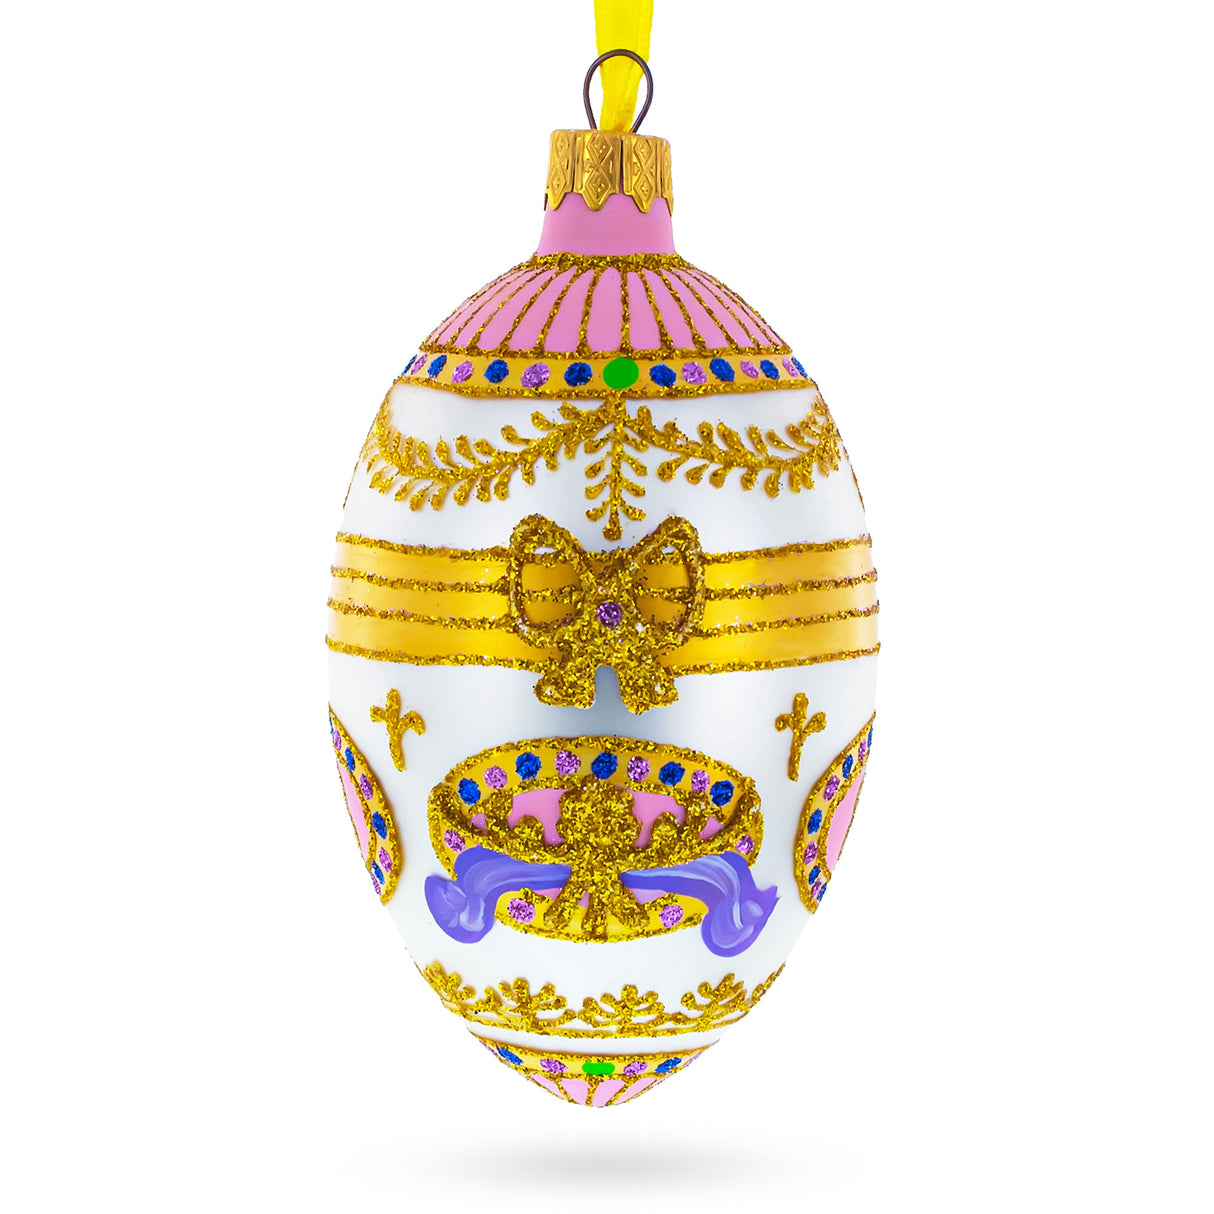 Glass 1903 Bonbonniere Royal Egg Glass Ornament 4 Inches in Gold color Oval